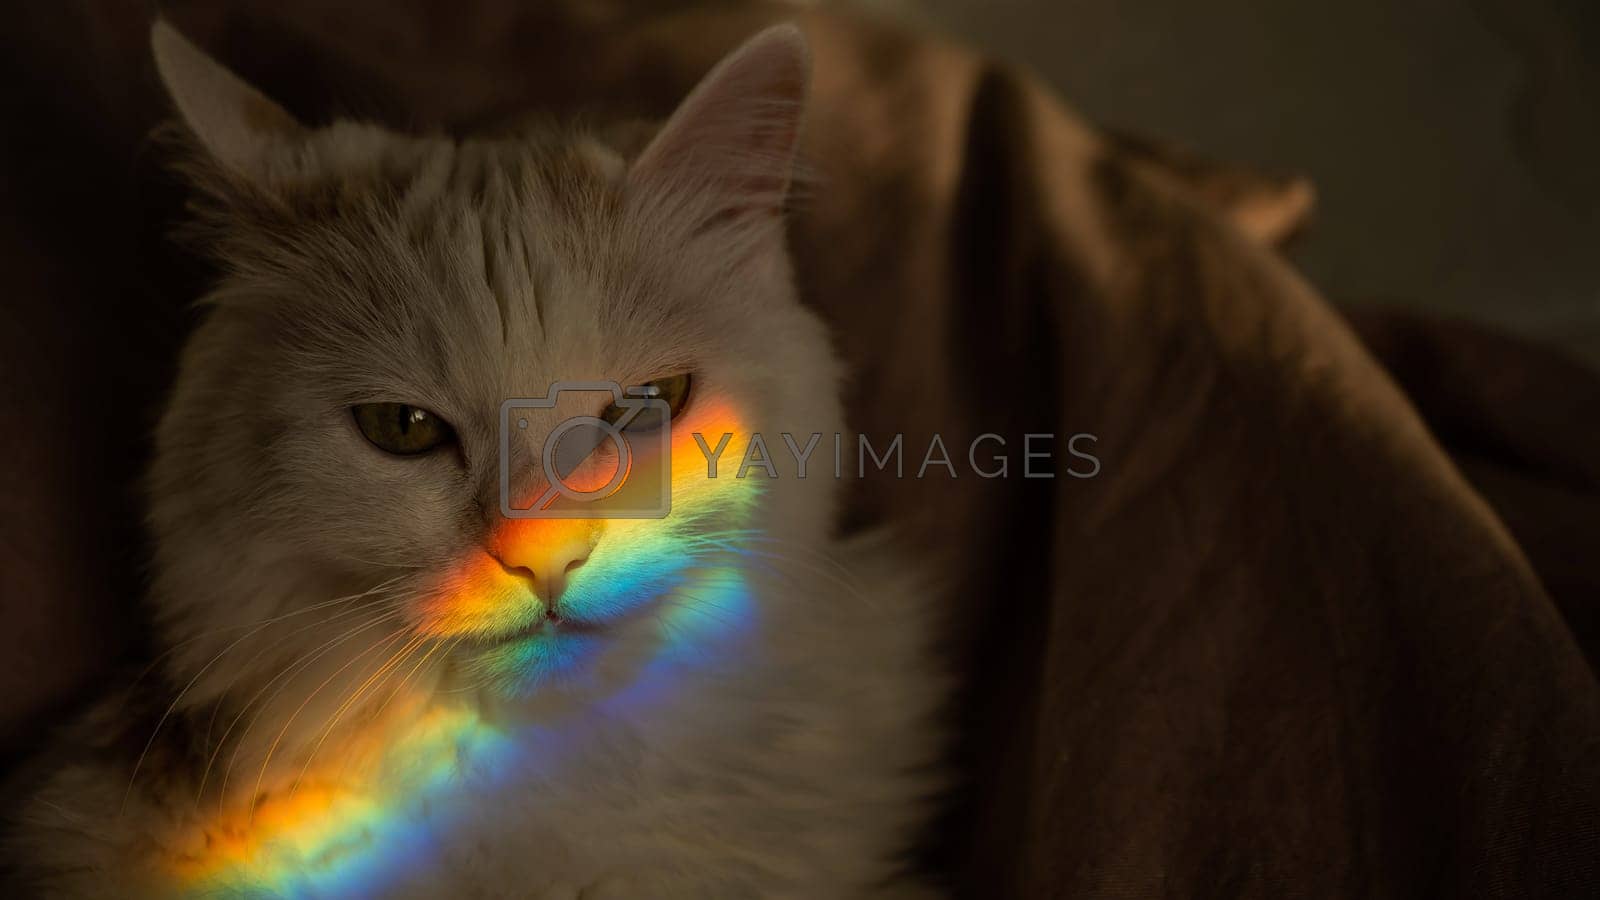 Royalty free image of A white fluffy cat lies in the bedroom with a rainbow on its face. by mrwed54